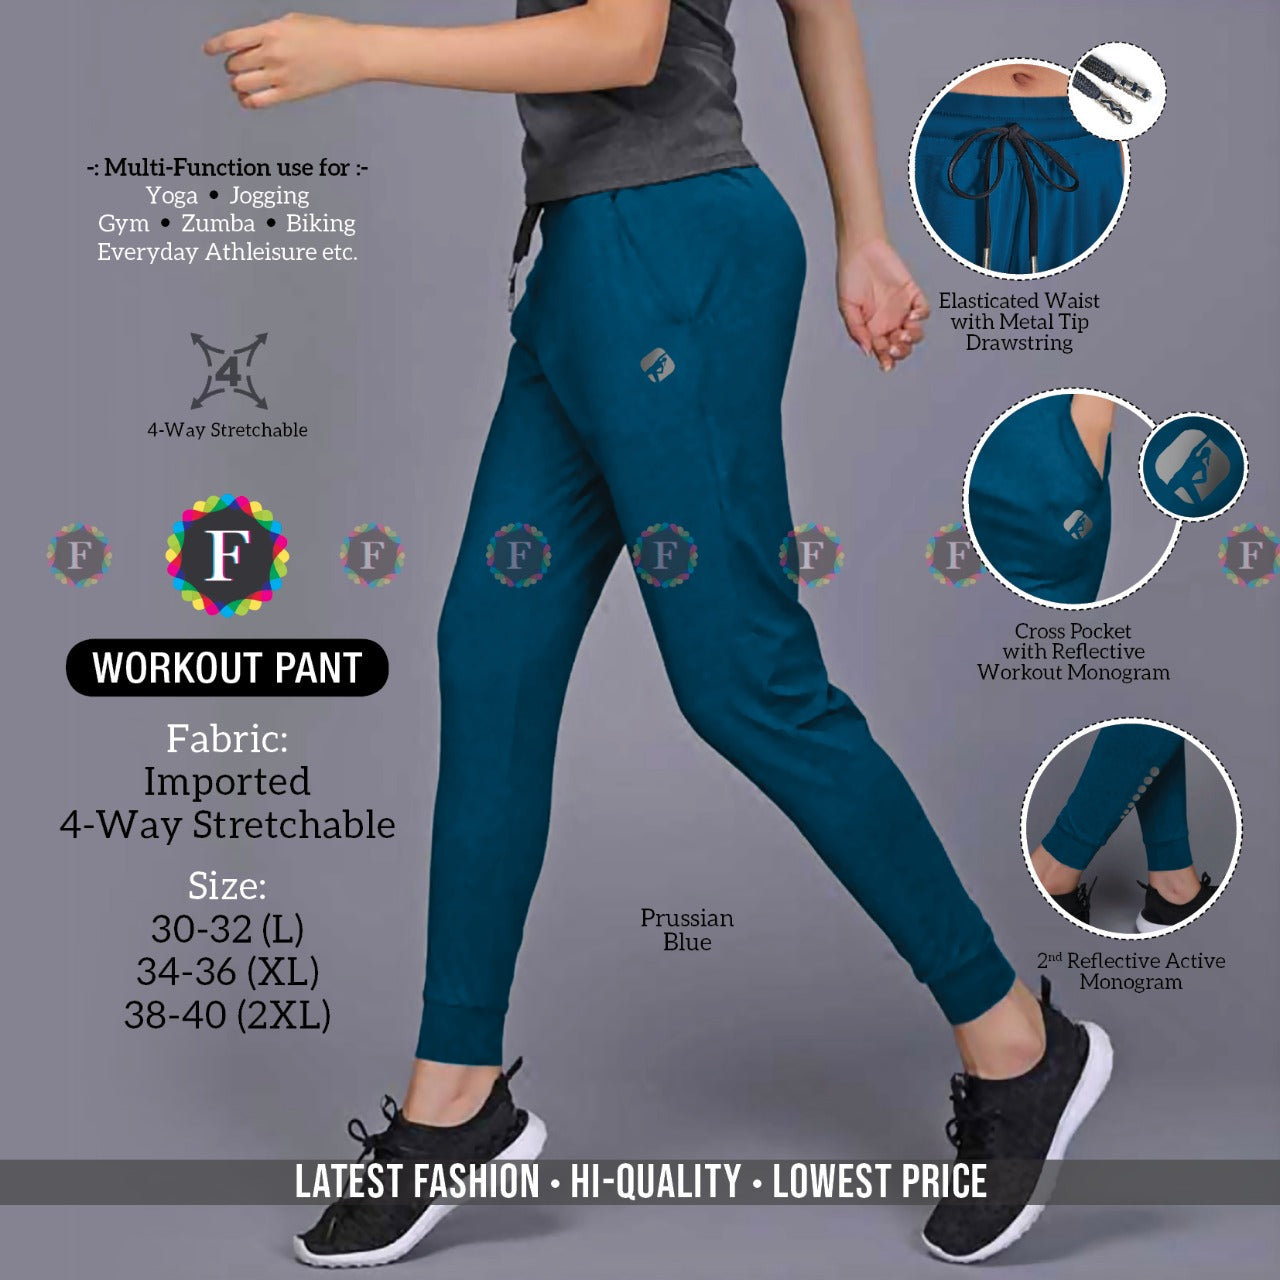 WORKOUT 4-Way Stretchable PANT